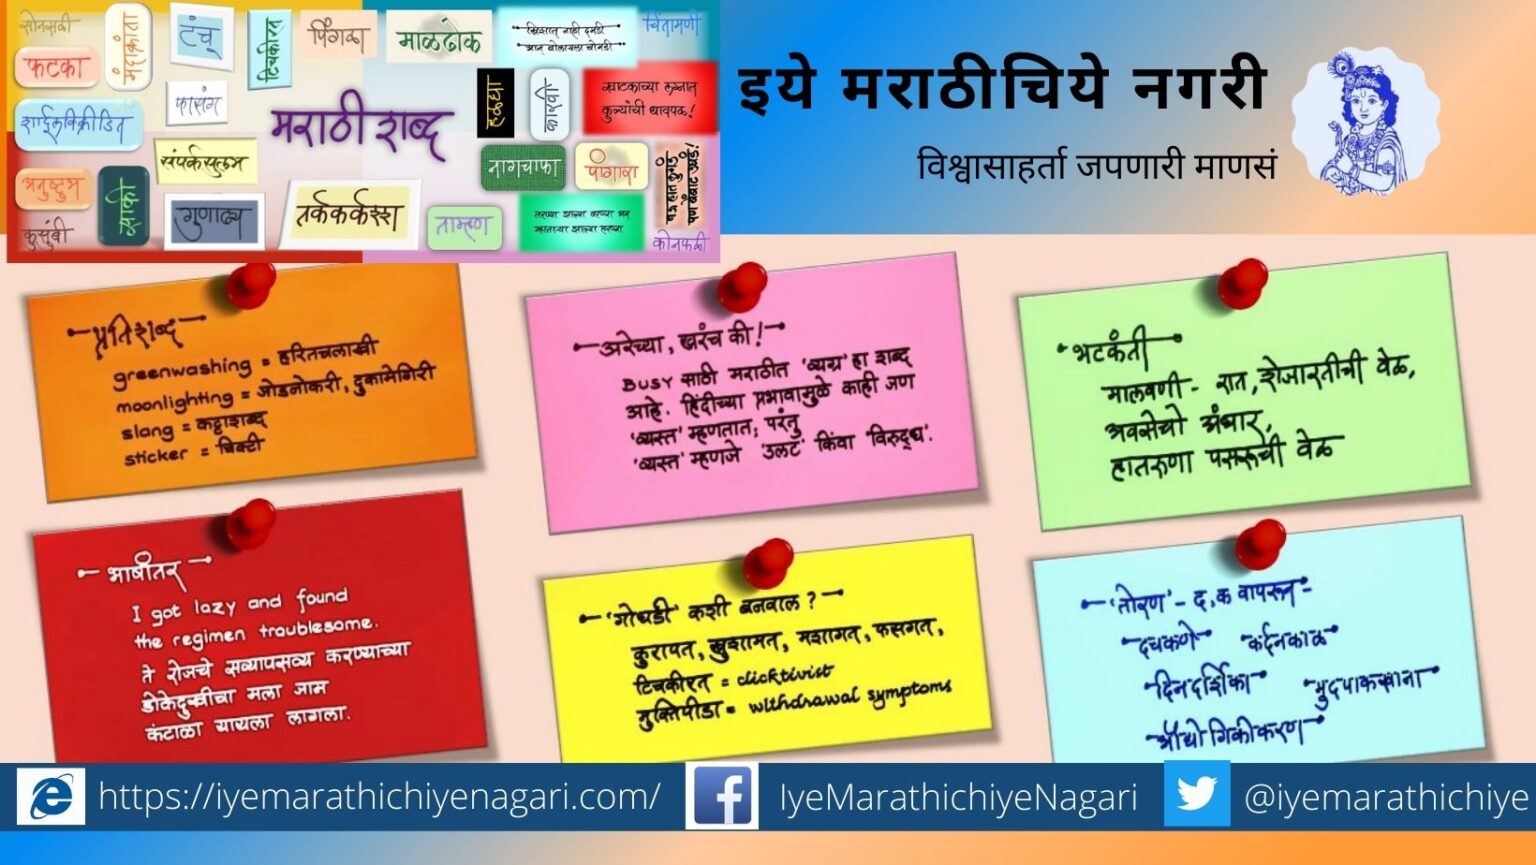 Admirable movement of Marathi words Facebook group